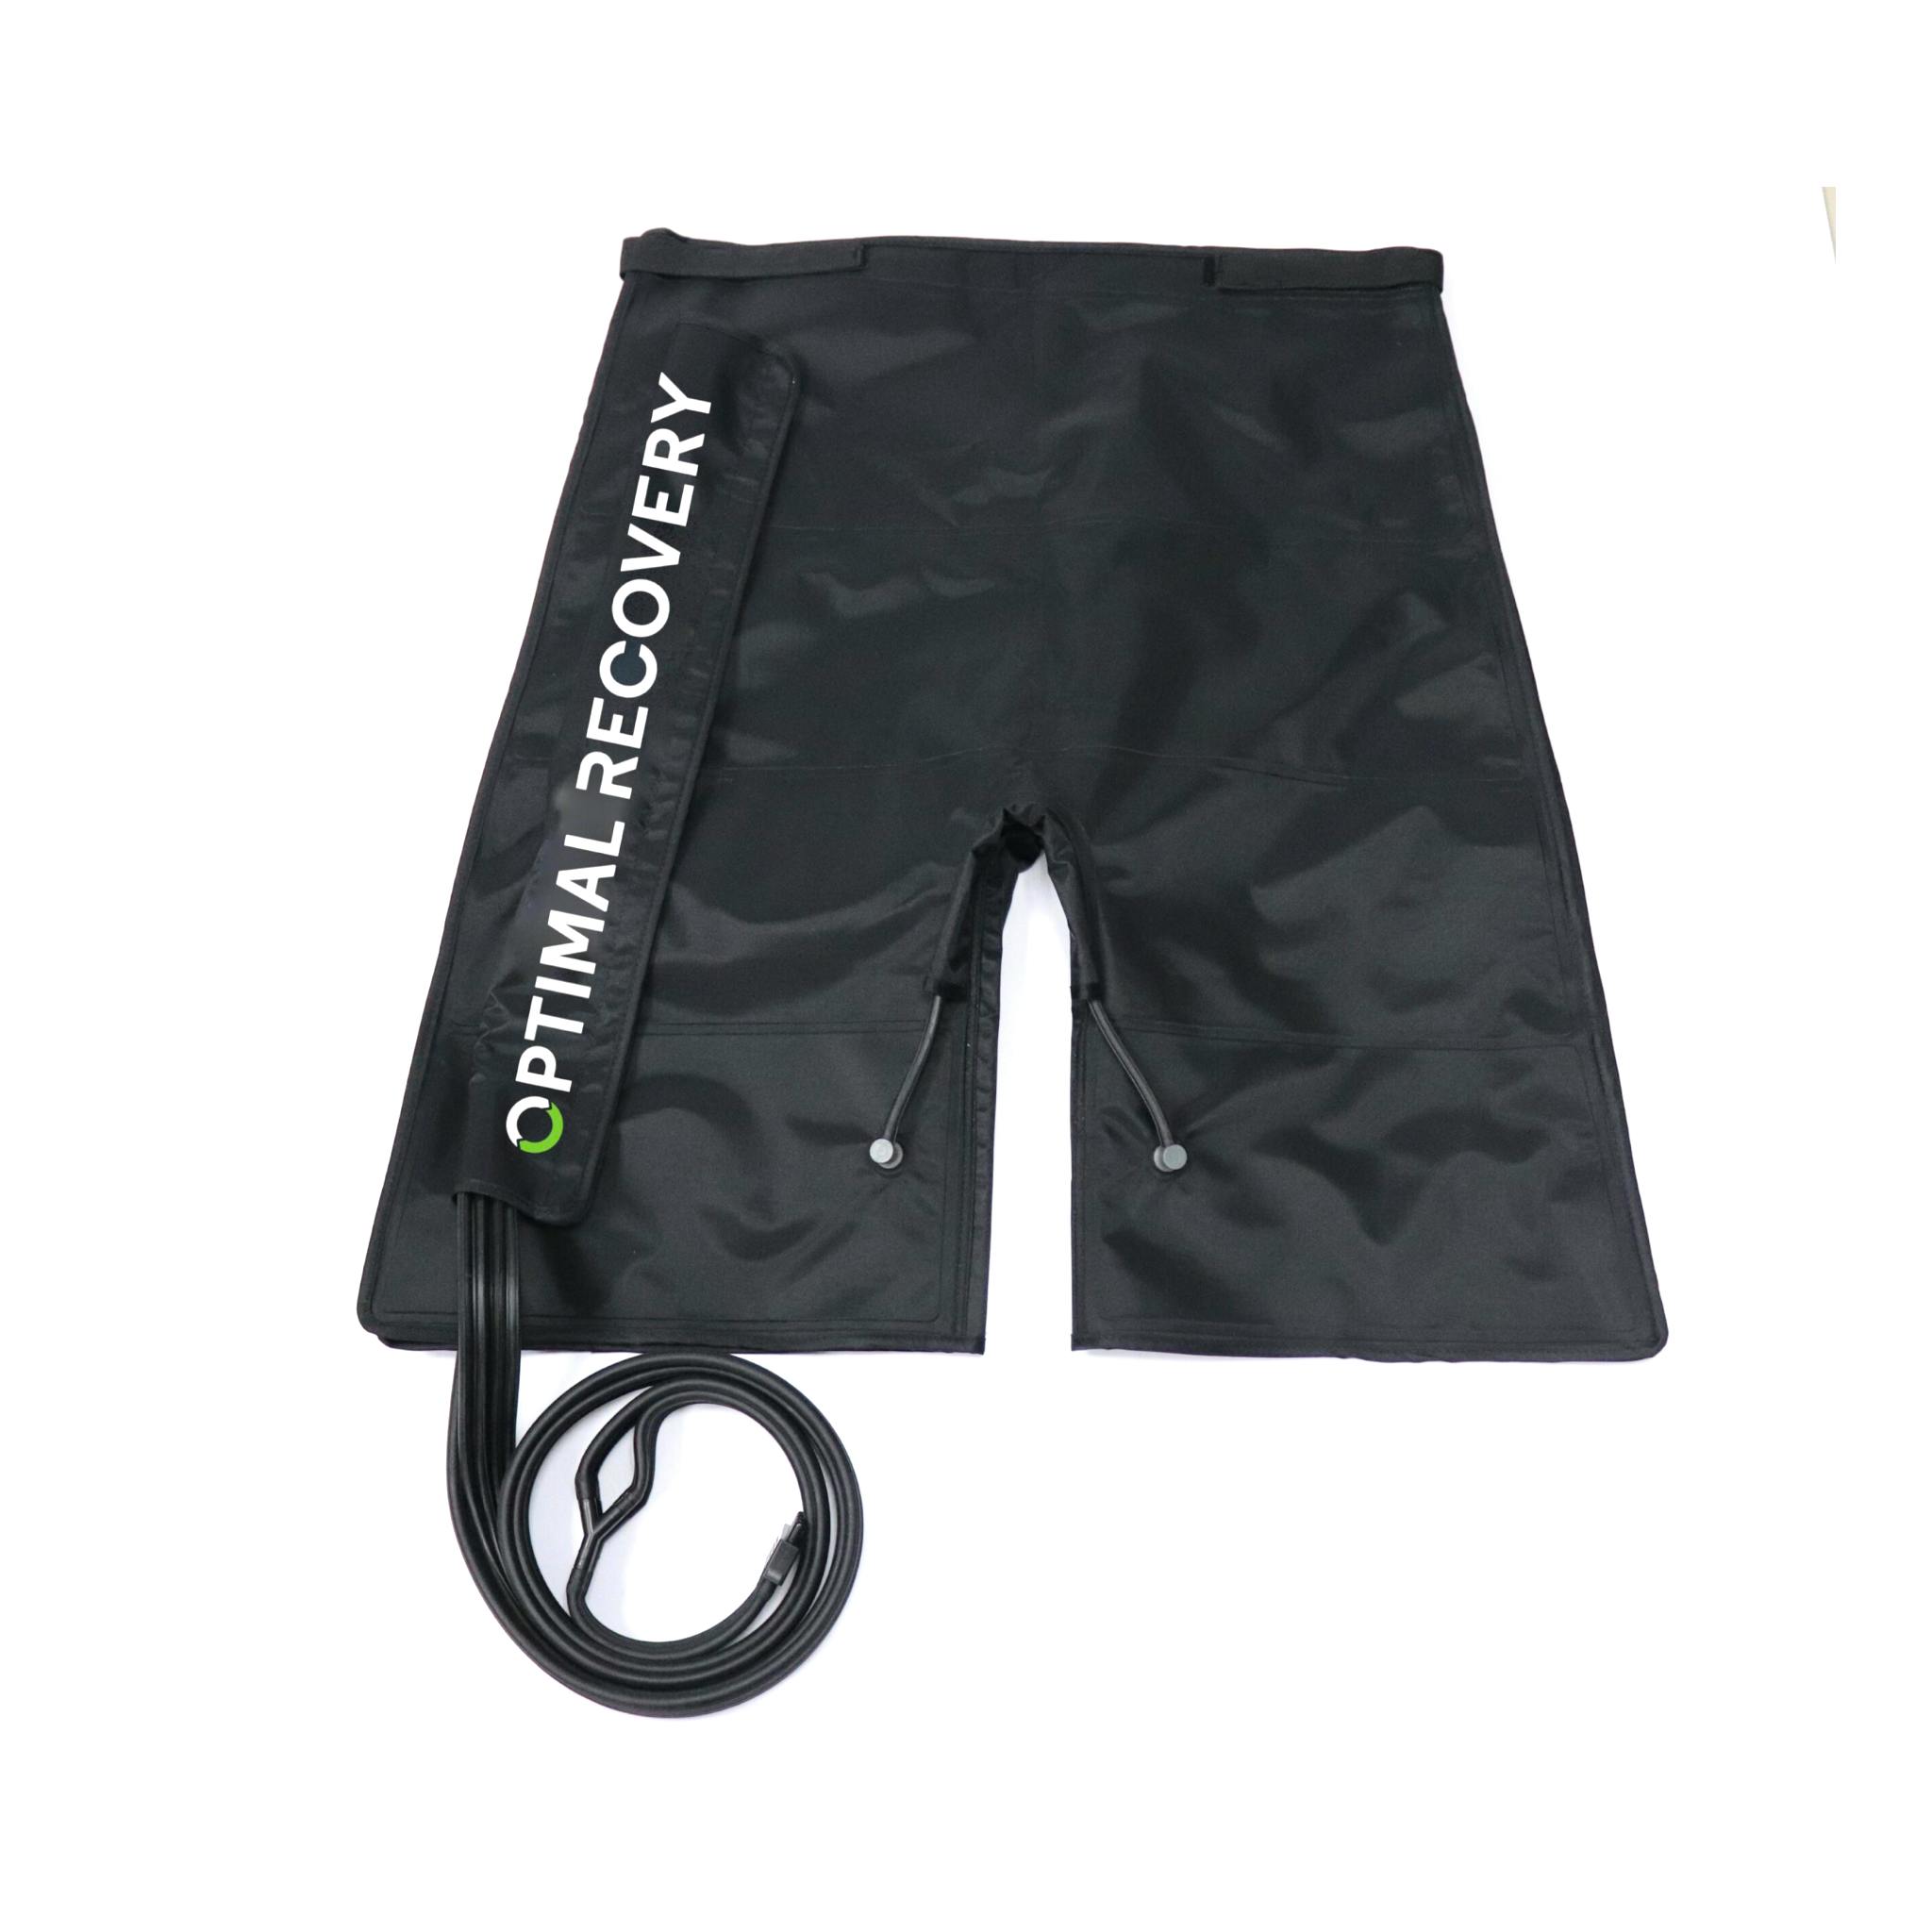 Recovery hip/groin compression - K6